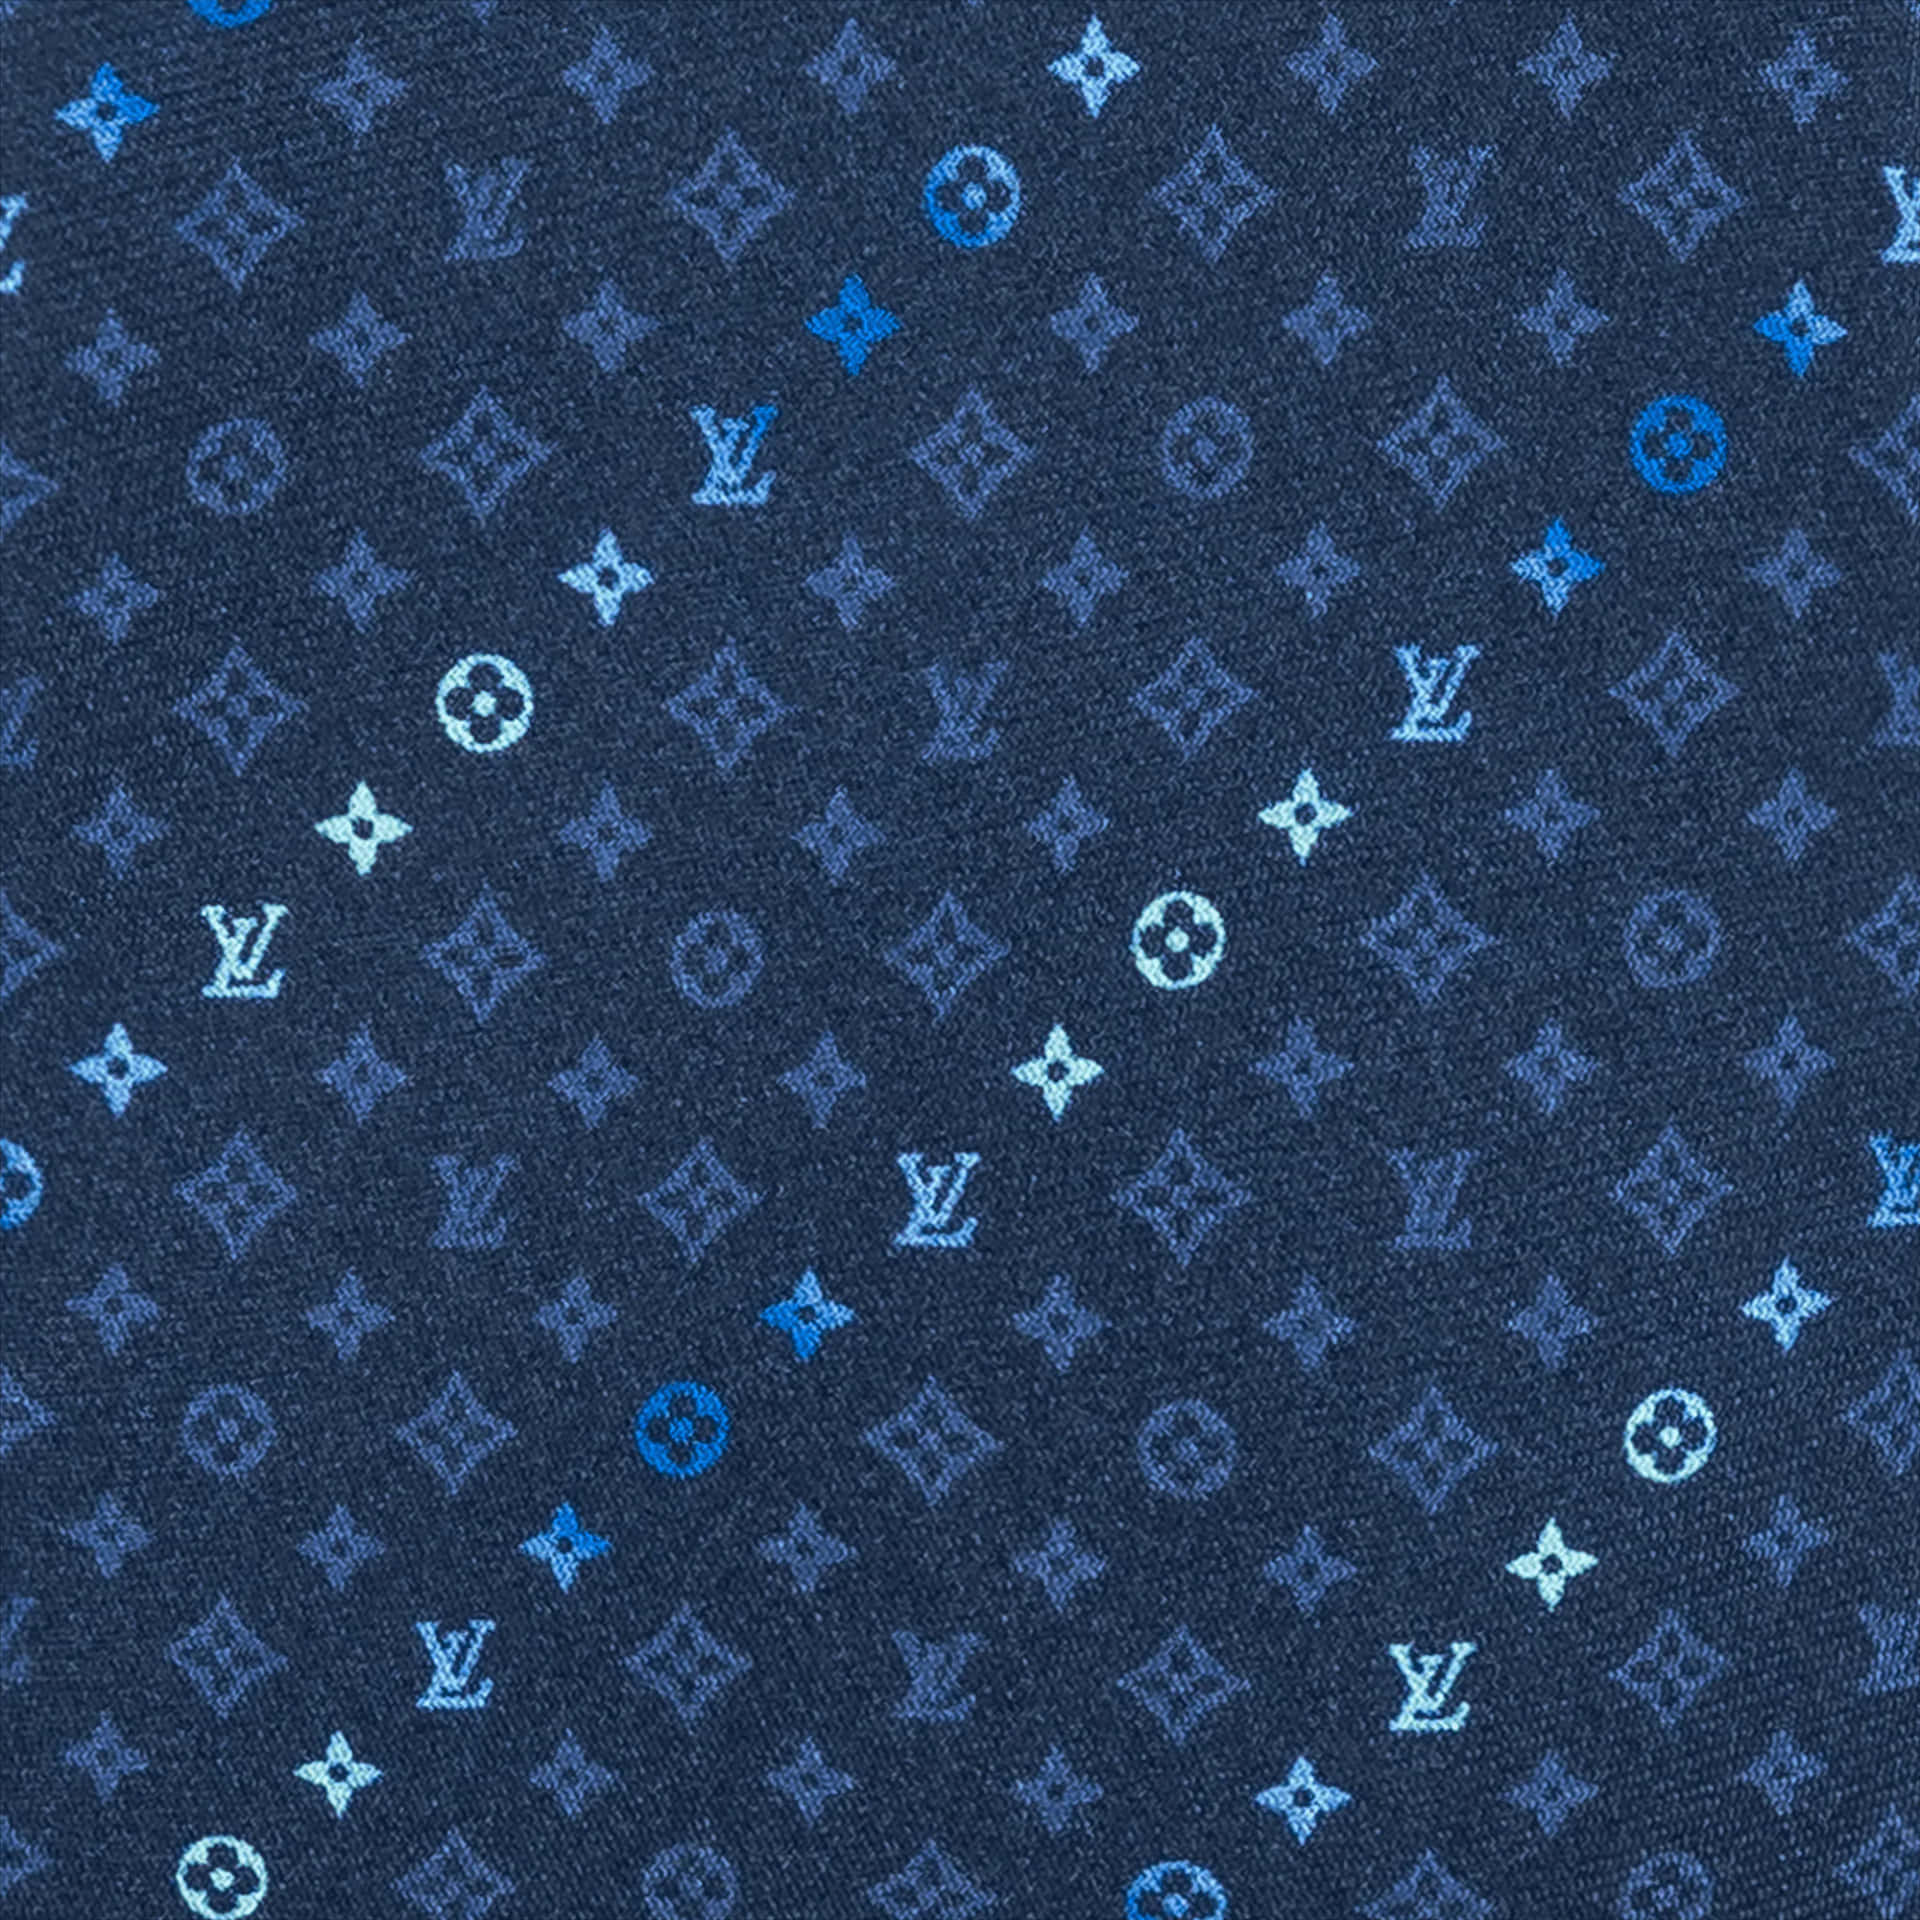 Get ready for a night on the town in classic style with Louis Vuitton Blue Wallpaper